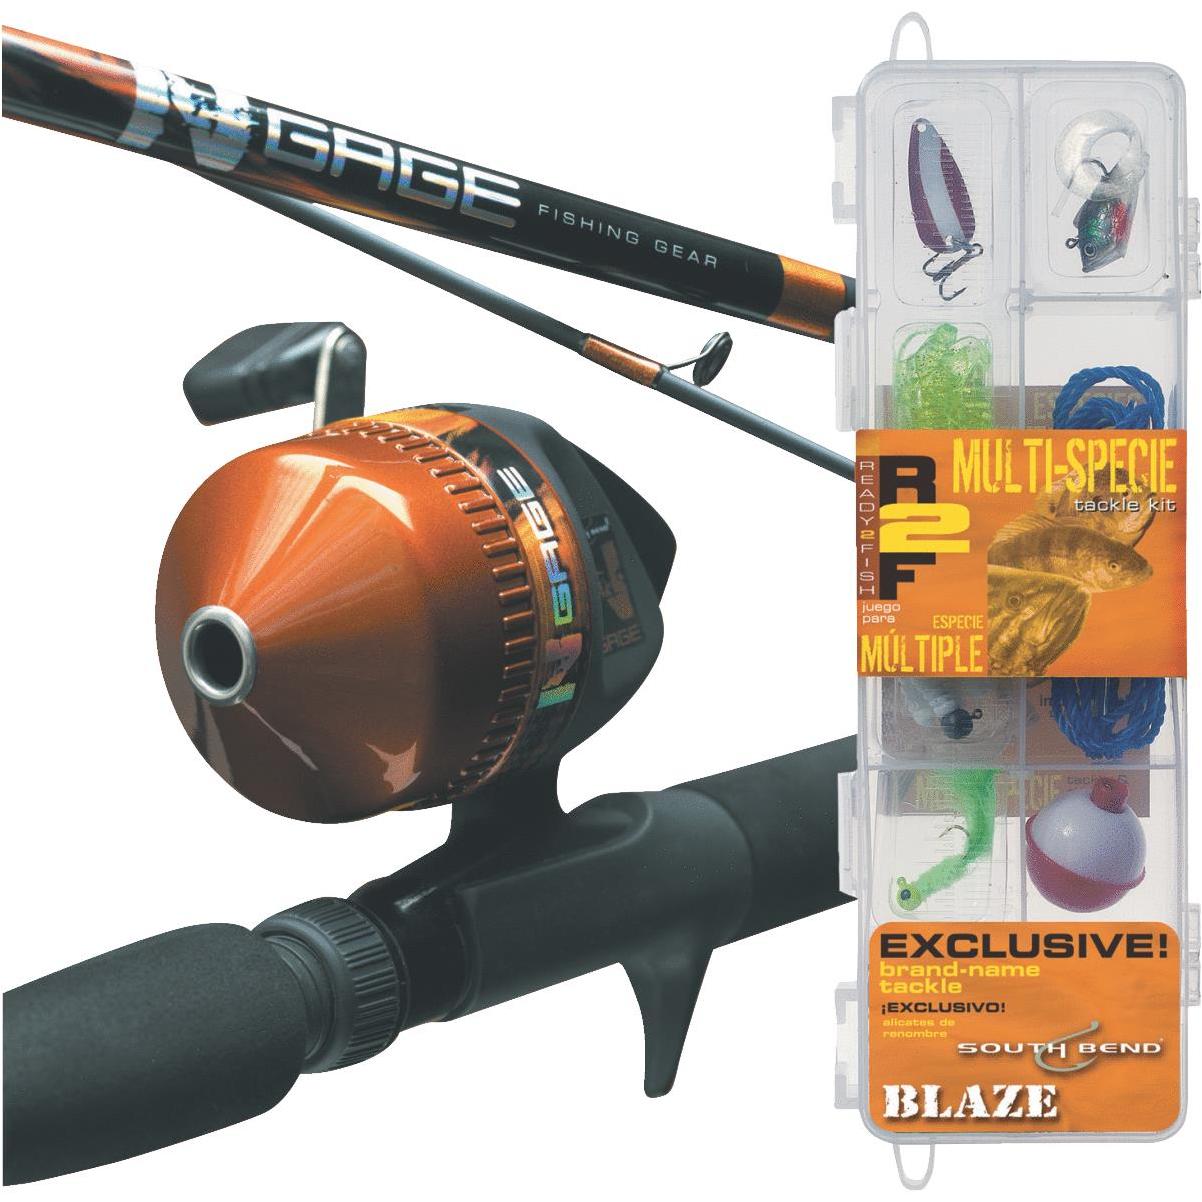 SouthBend Ready 2 Fish All Species Fishing Rod & Spincast Reel